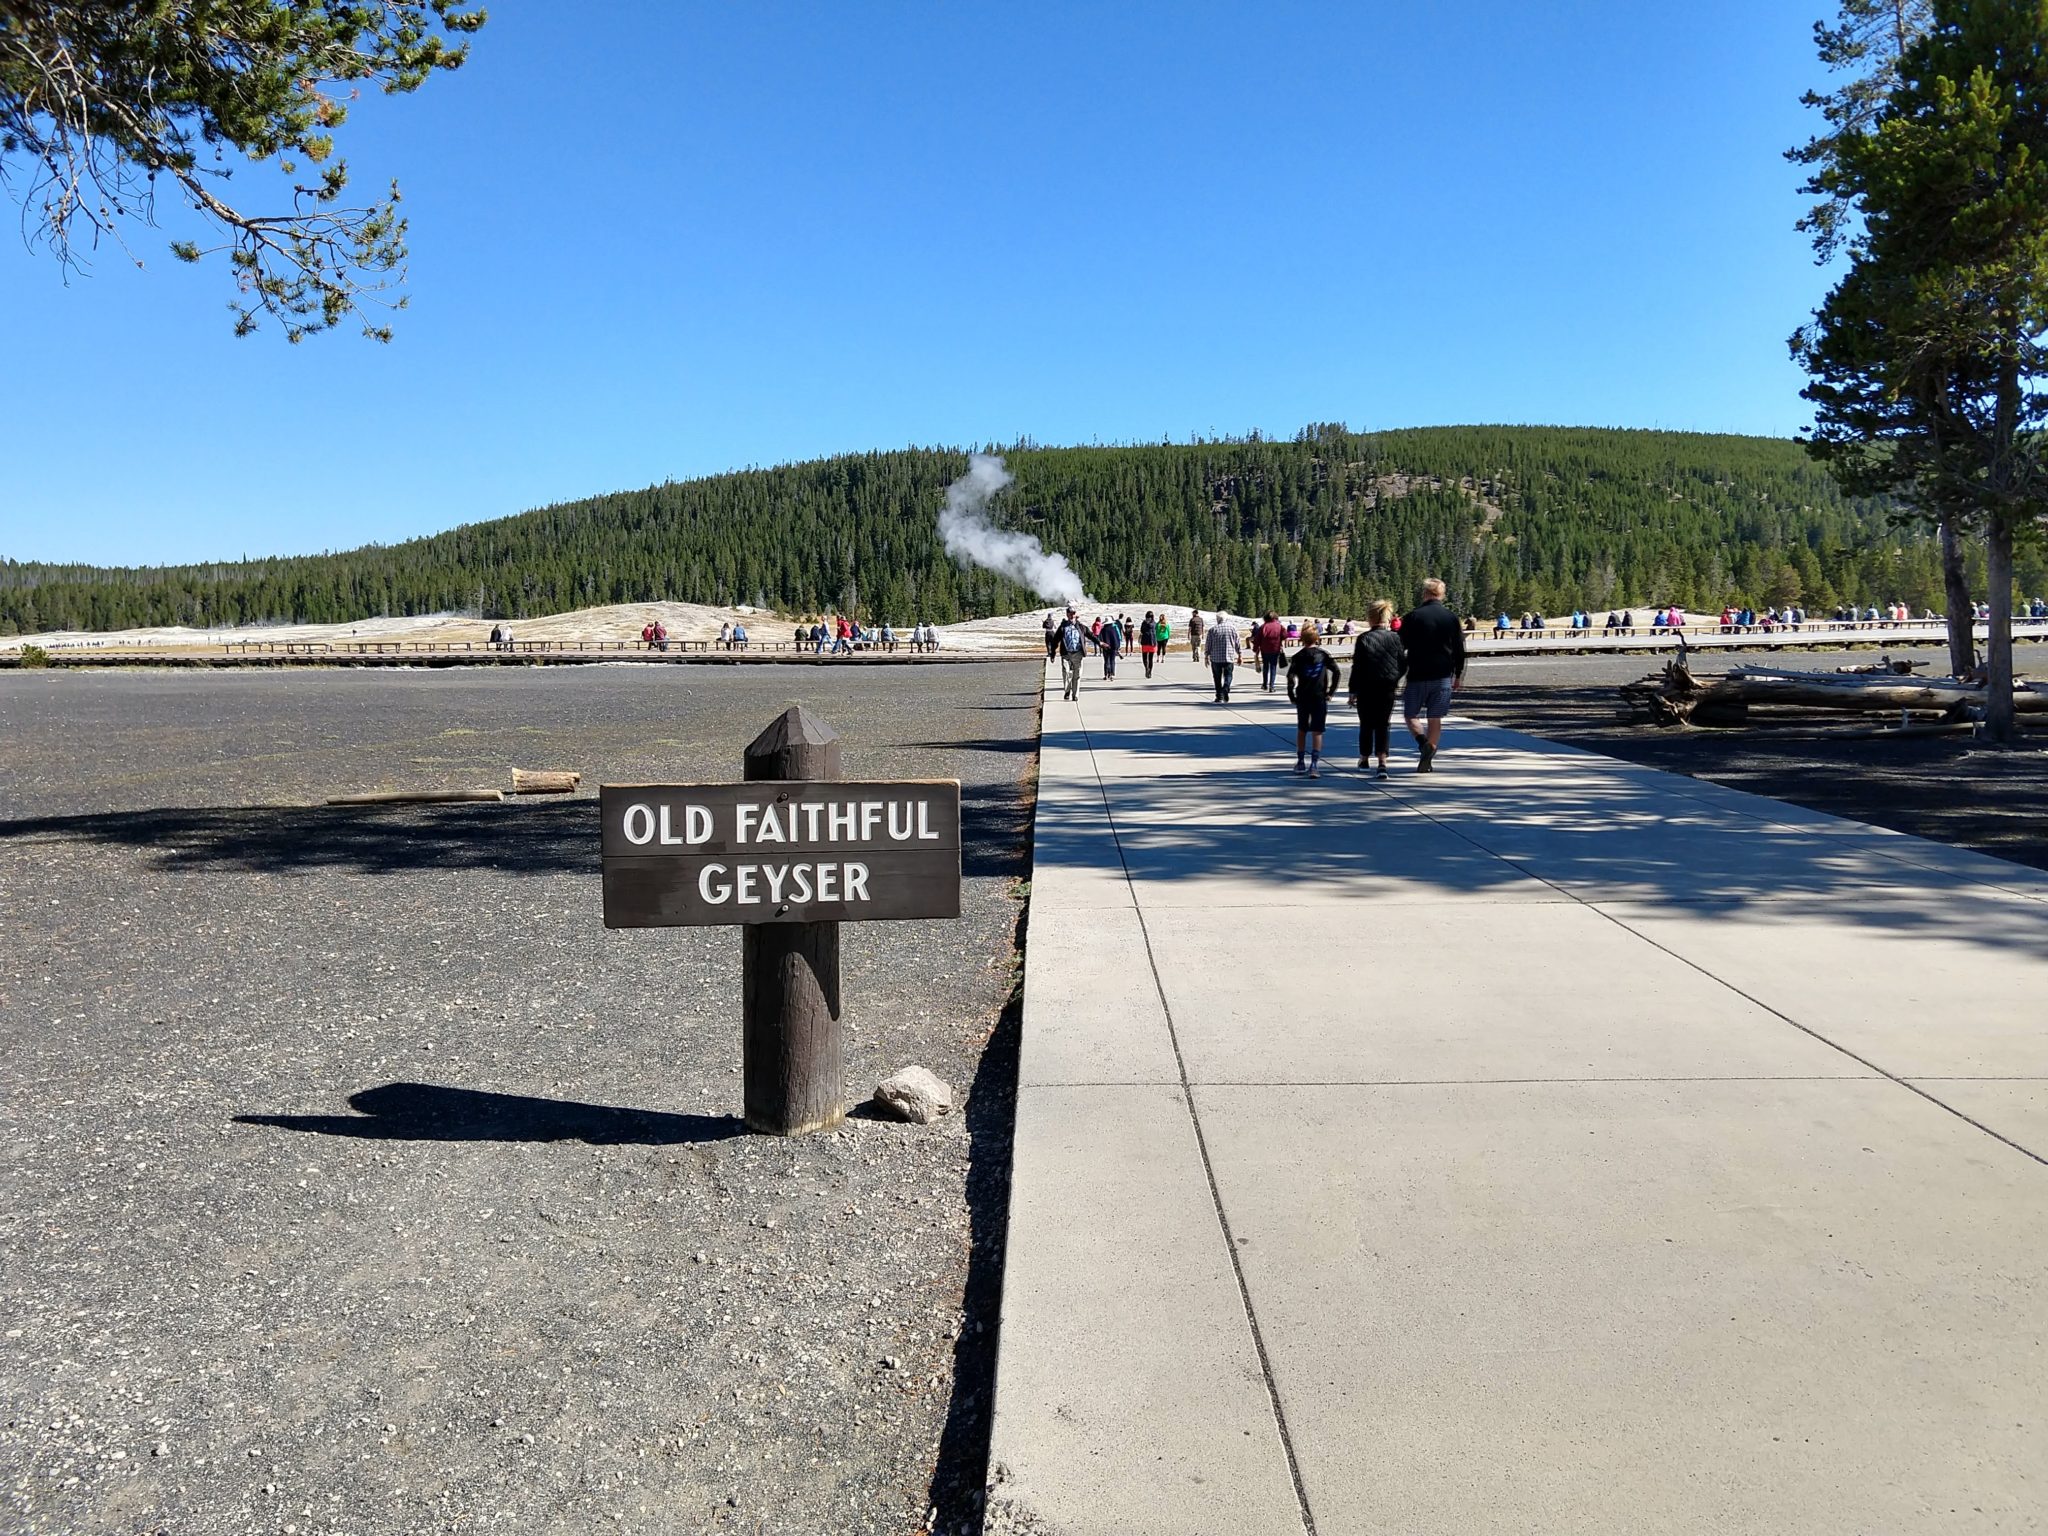 Hot Springs, Steam Vents, and Geysers Oh My!